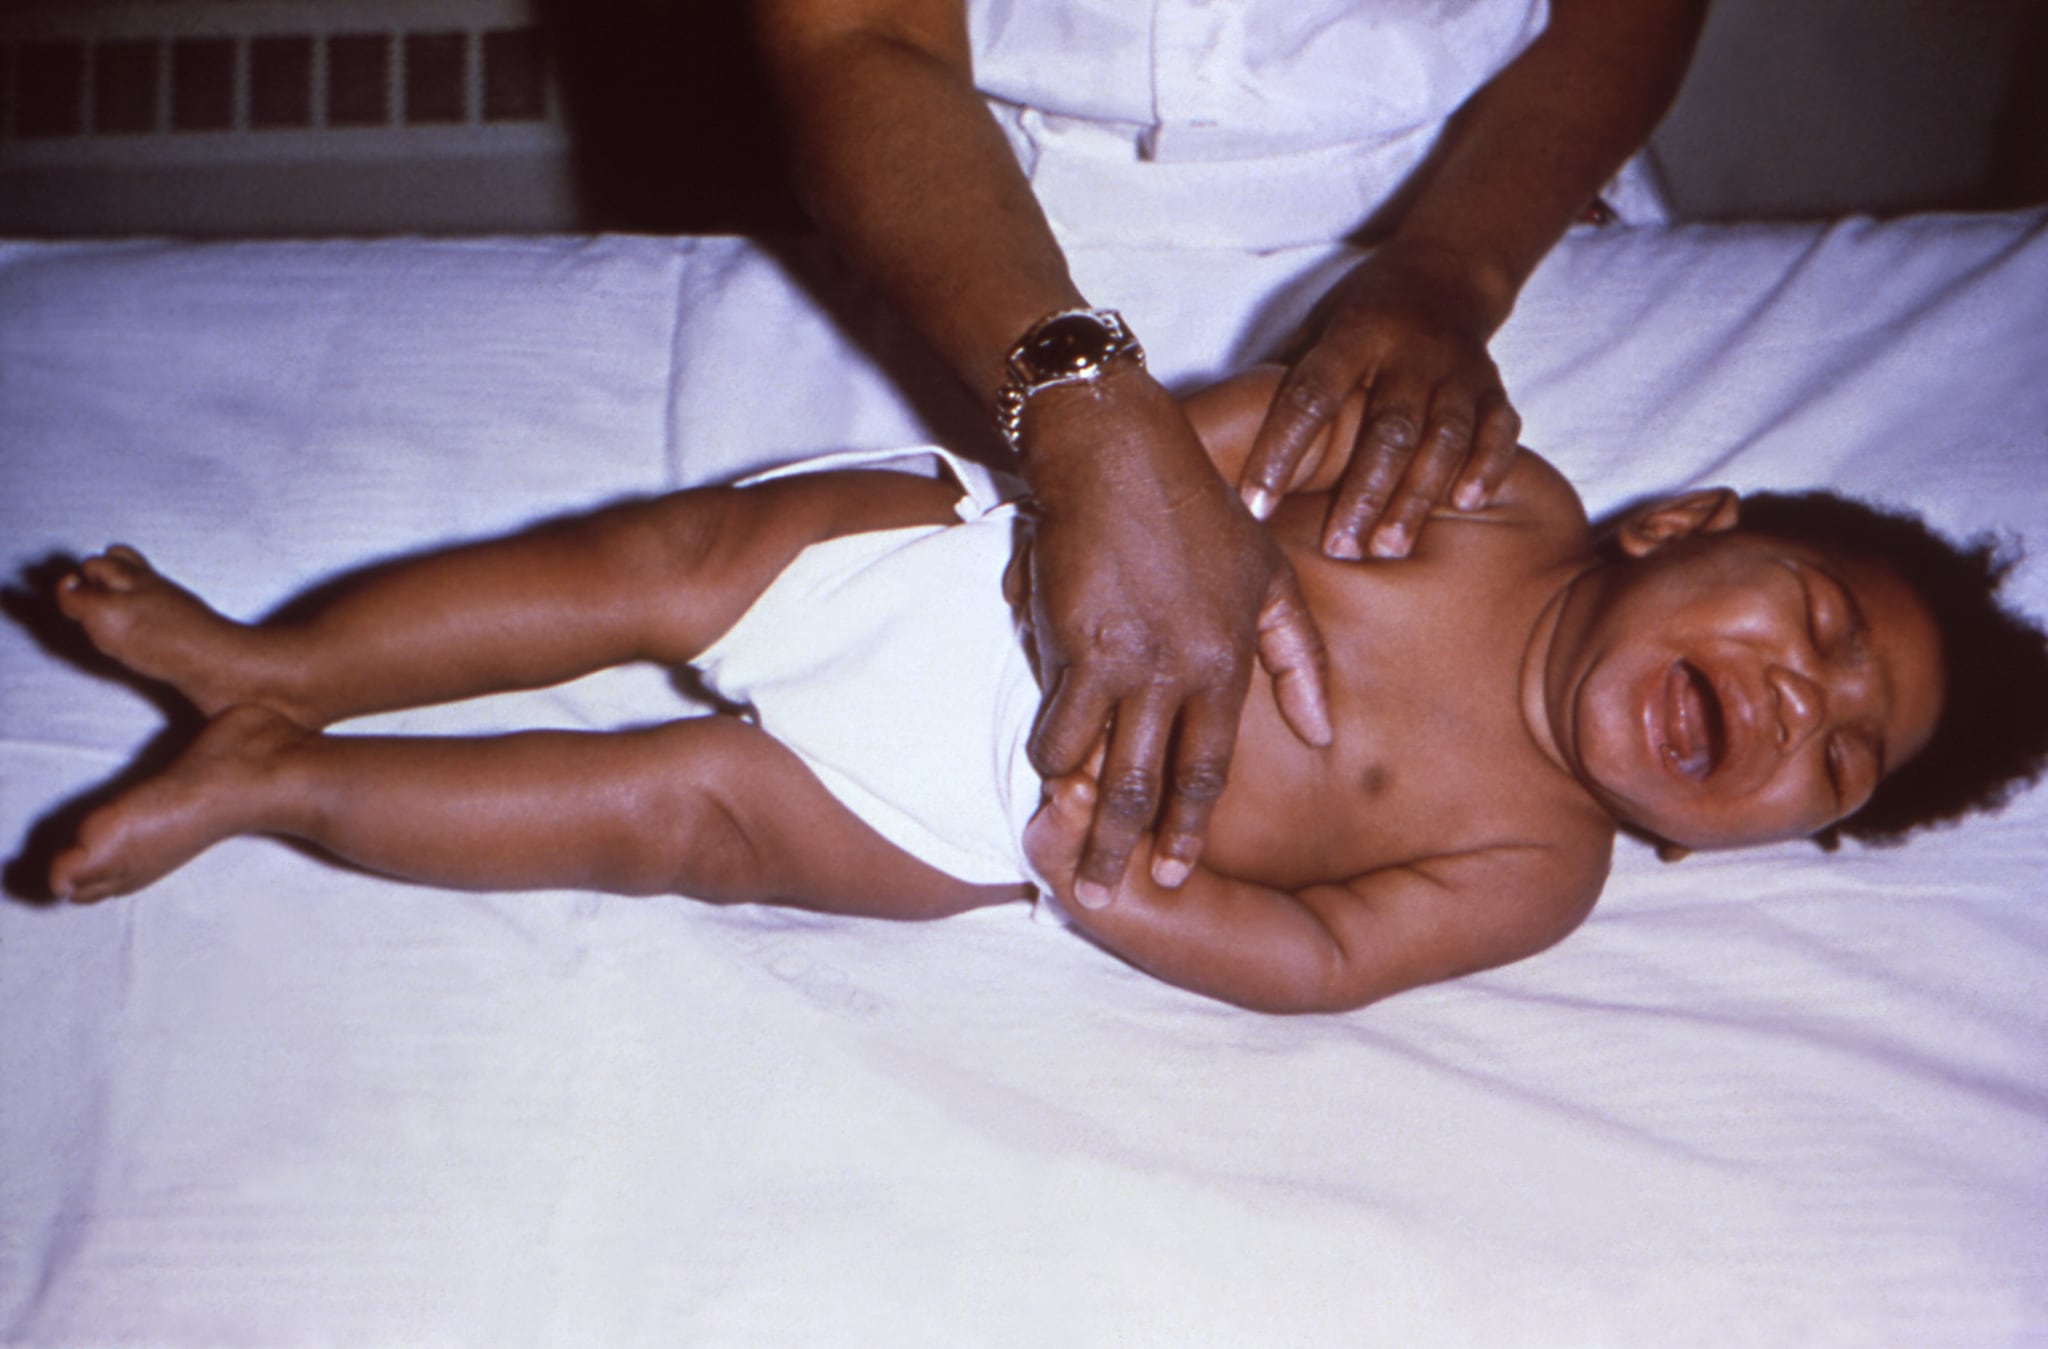 Infant born with congenital CMV showing signs of severe microcephaly and lower limb spasticity. Source: CDC Public Health Image Library.